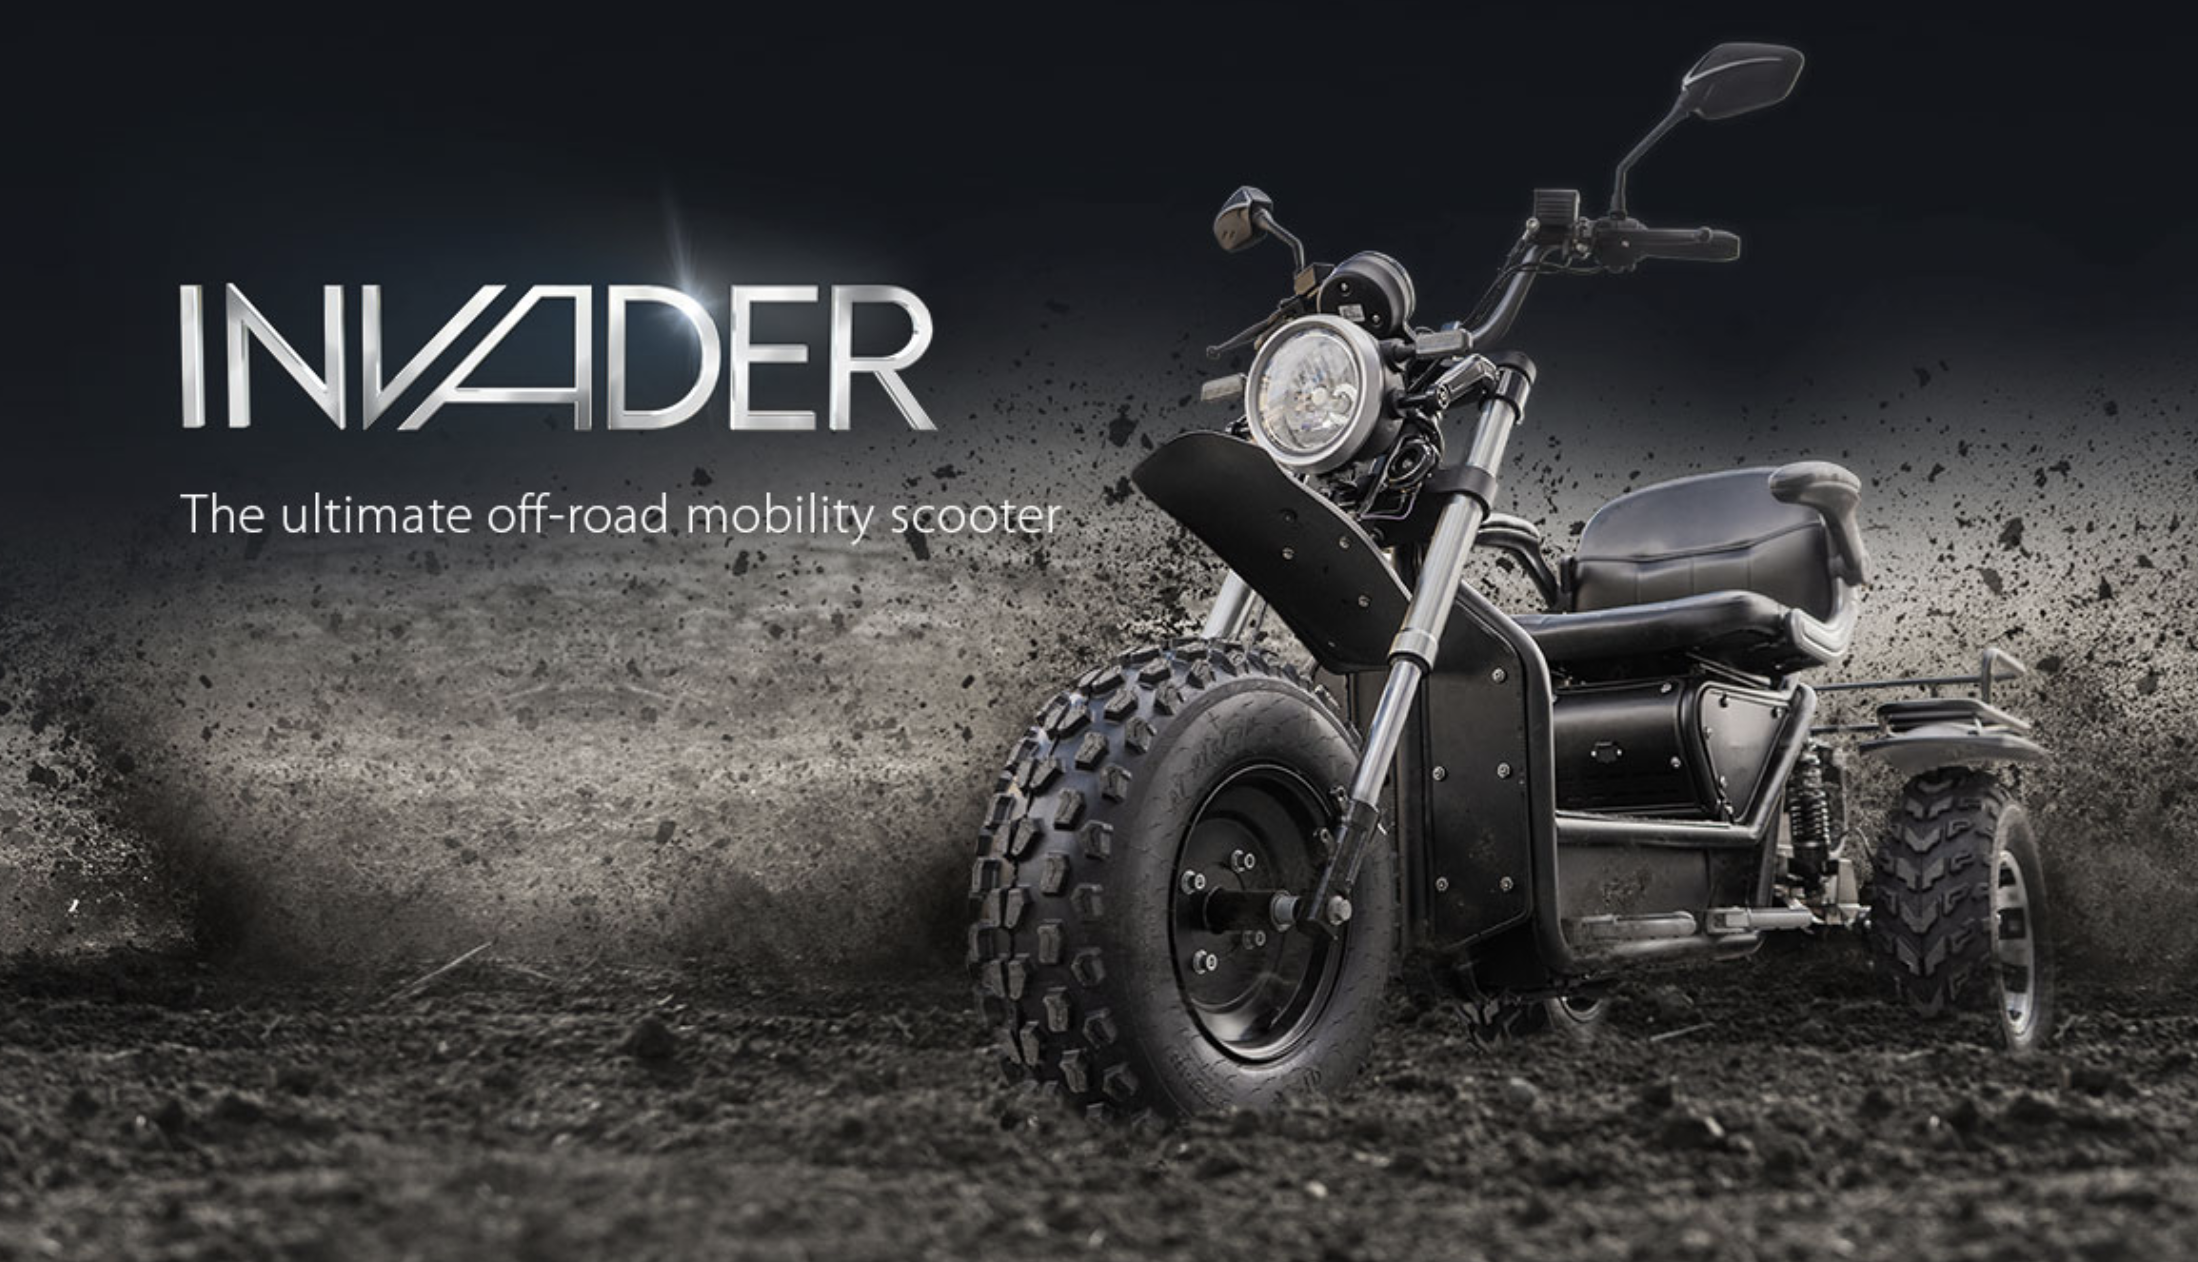 Scooterpac’s Latest Triumph, Invader - The New Off Roader